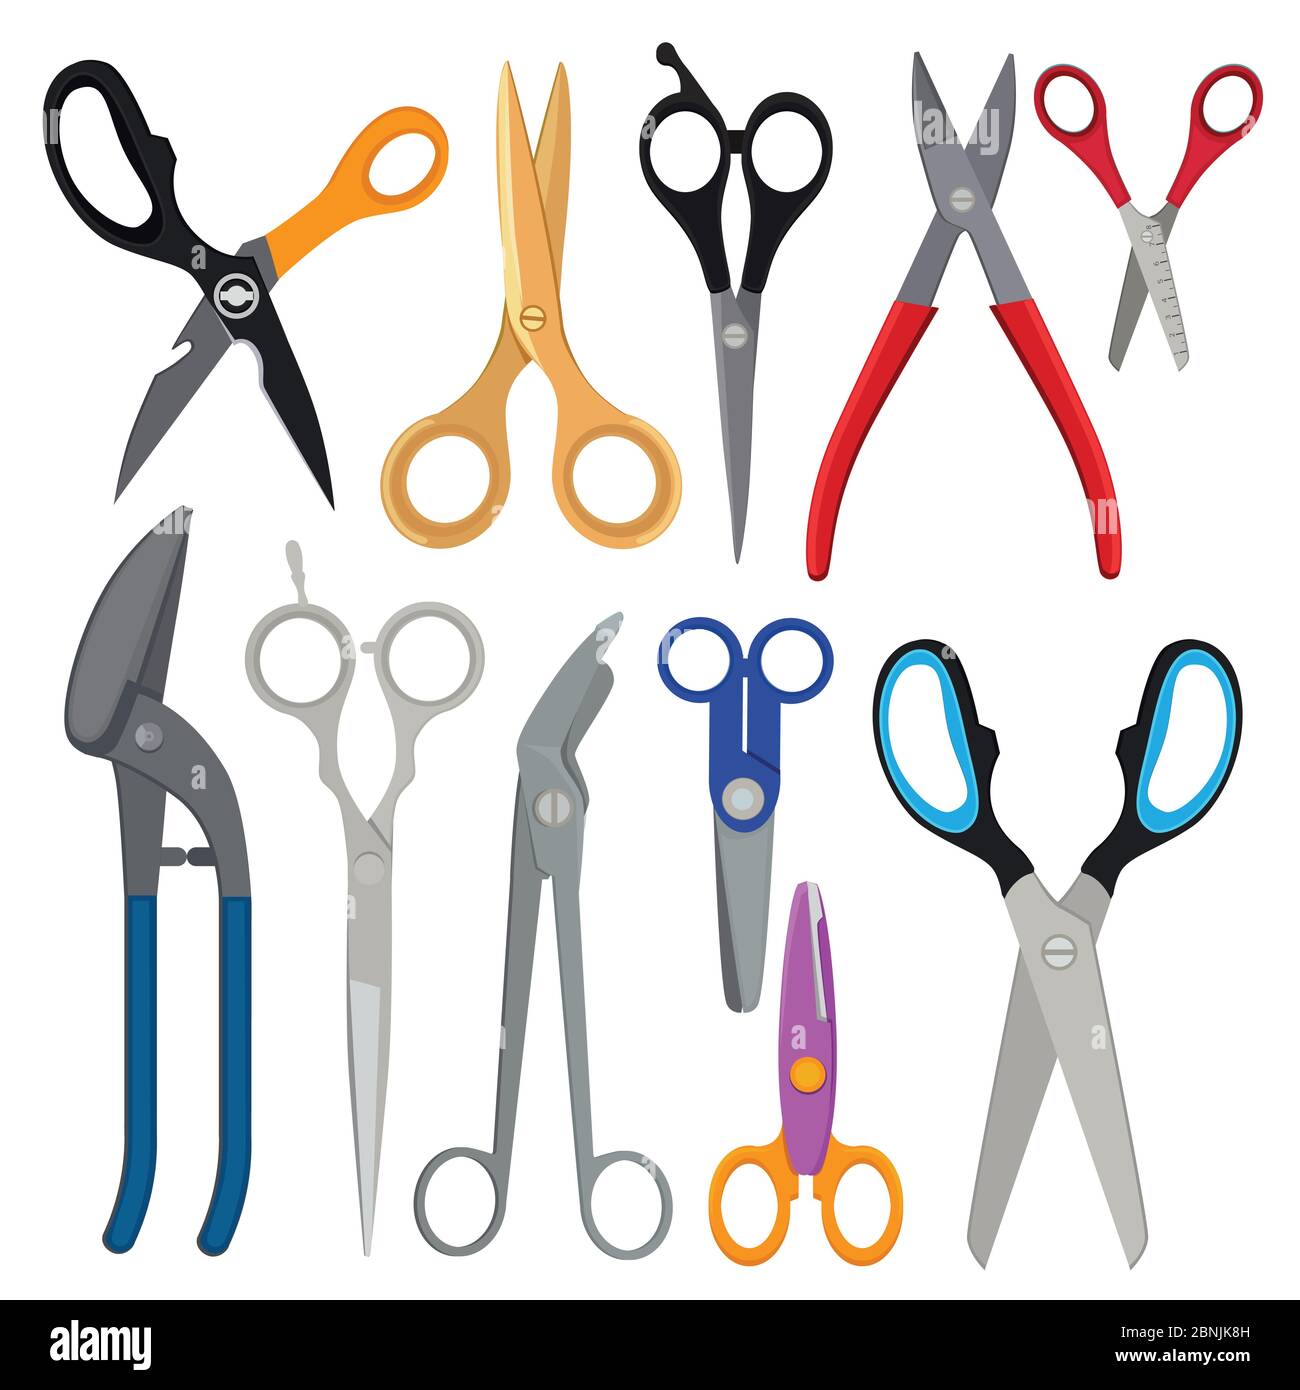 Vector illustrations of different types of scissors Stock Vector